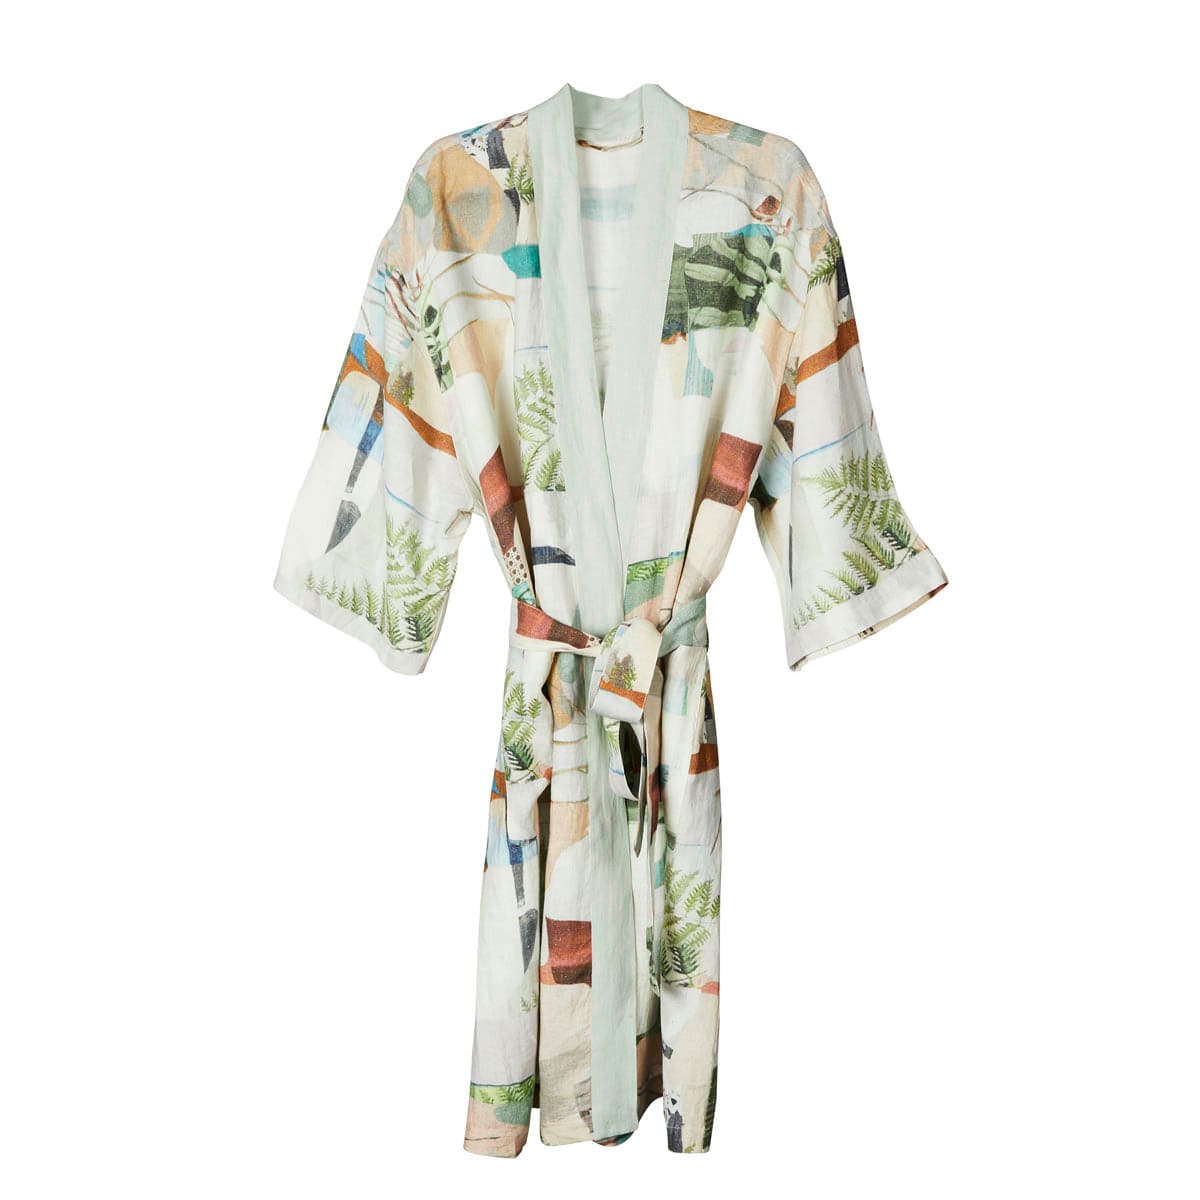 Art Bath Robe - Love it when a plan comes together